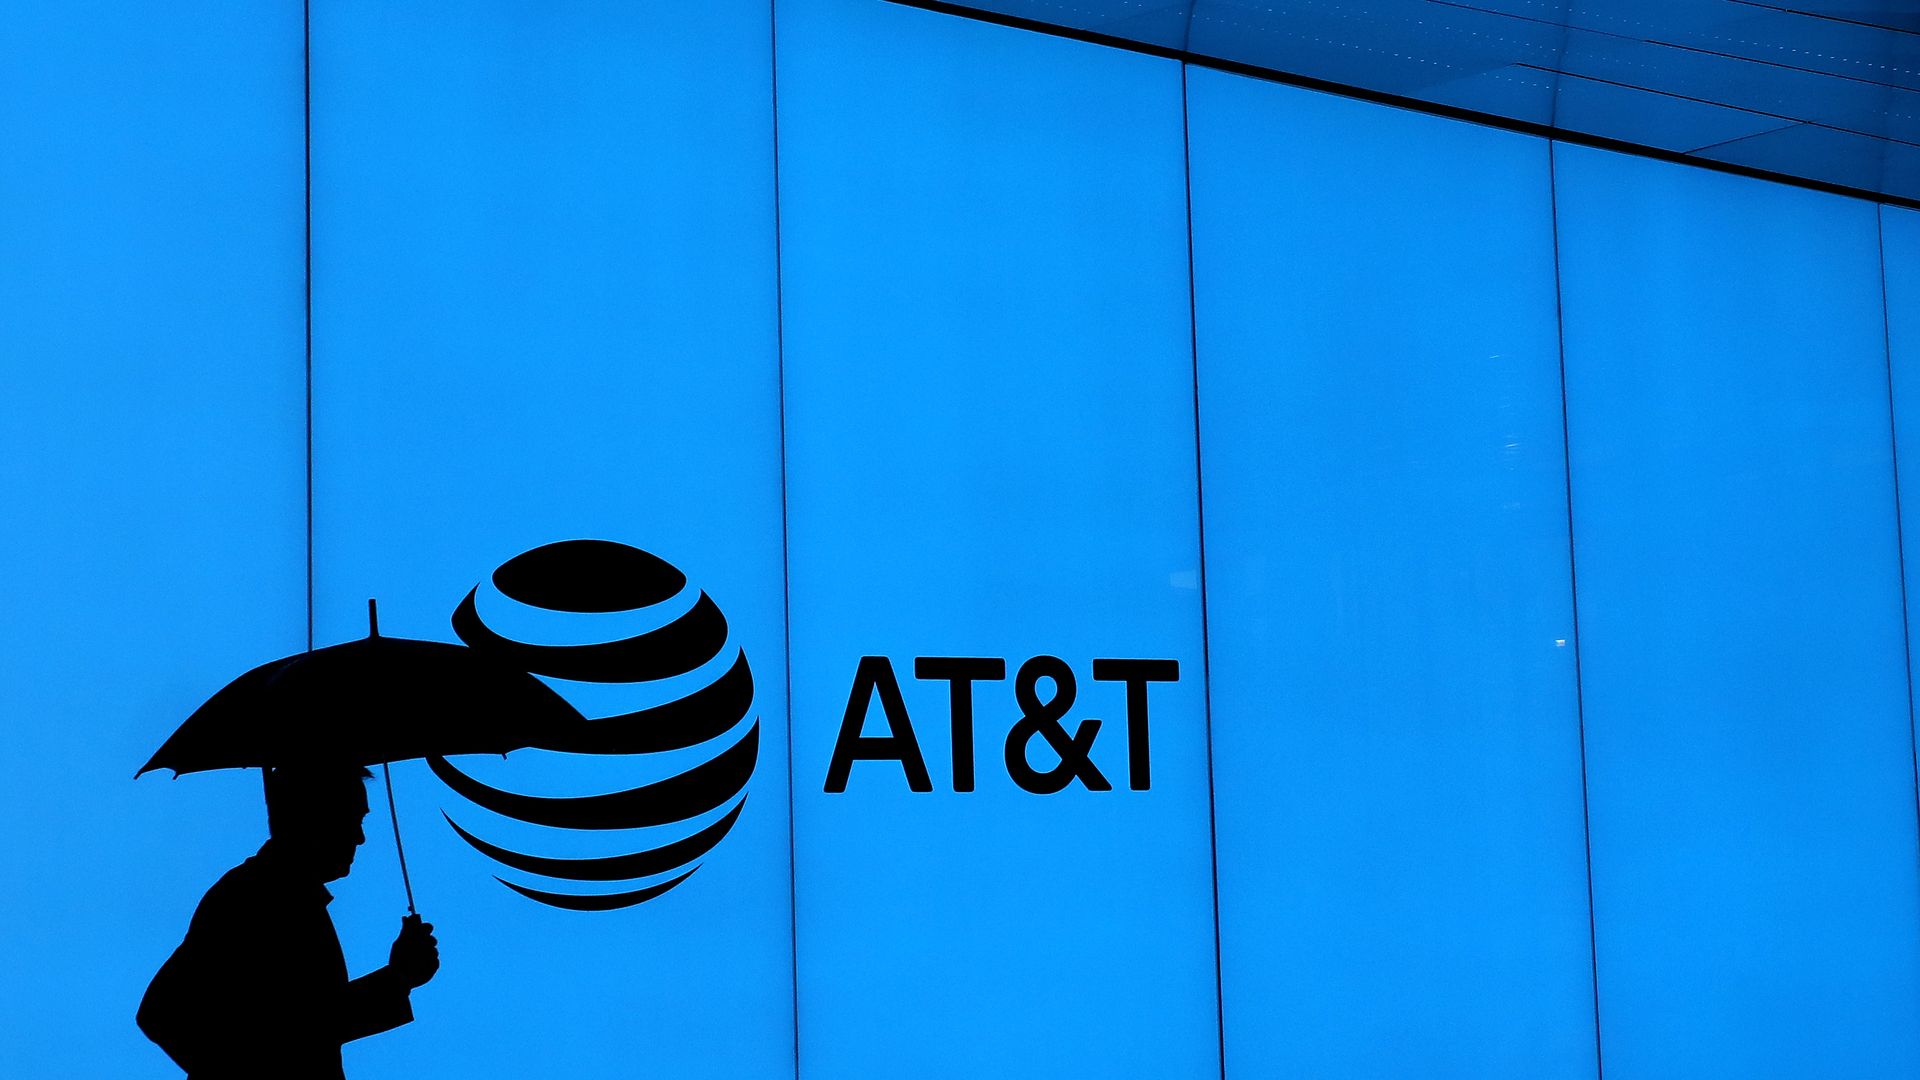 A photo of someone walking next to an AT&T logo.